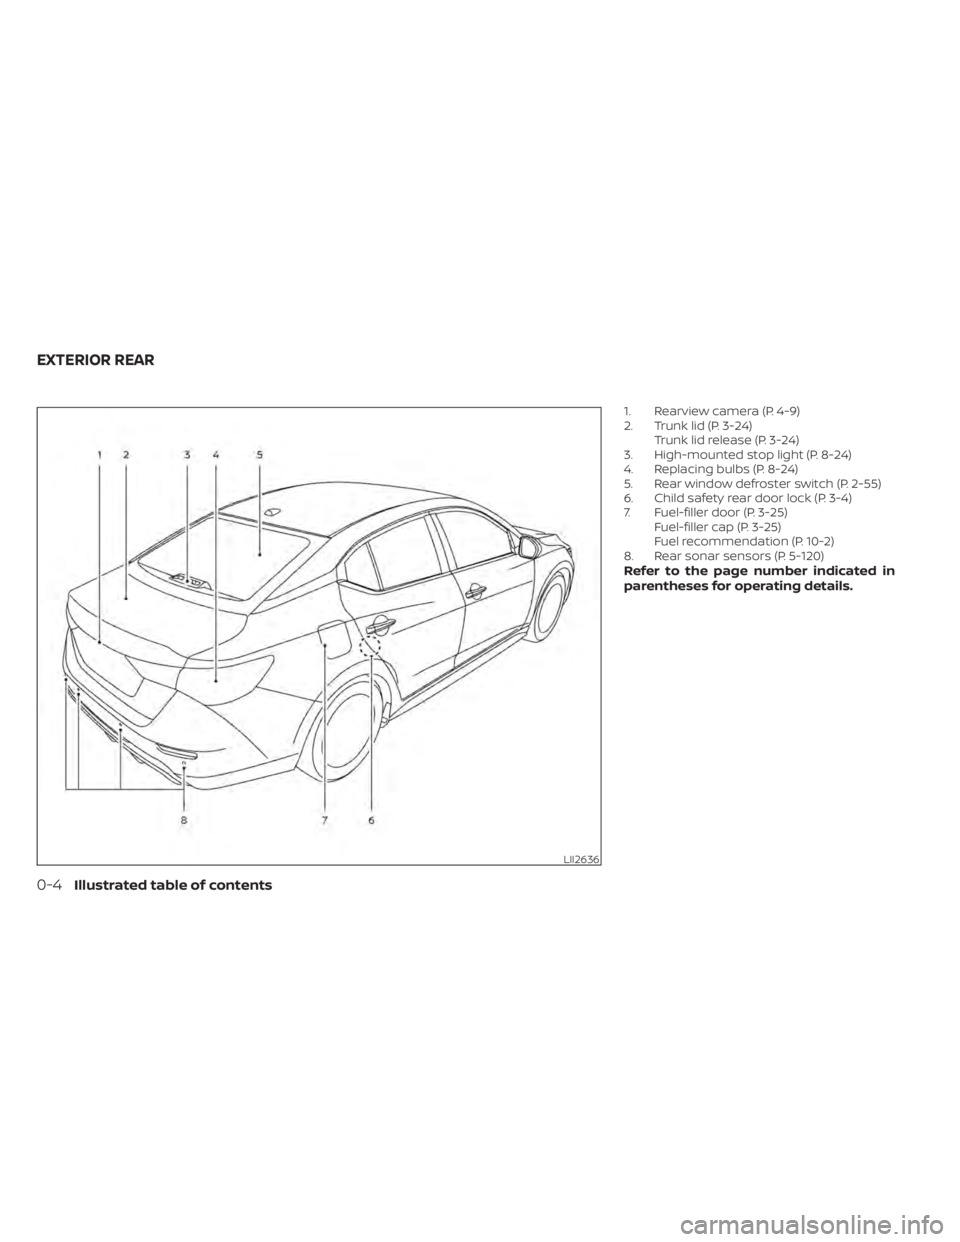 NISSAN SENTRA 2022  Owners Manual 1. Rearview camera (P. 4-9)
2. Trunk lid (P. 3-24)Trunk lid release (P. 3-24)
3. High-mounted stop light (P. 8-24)
4. Replacing bulbs (P. 8-24)
5. Rear window defroster switch (P. 2-55)
6. Child safet